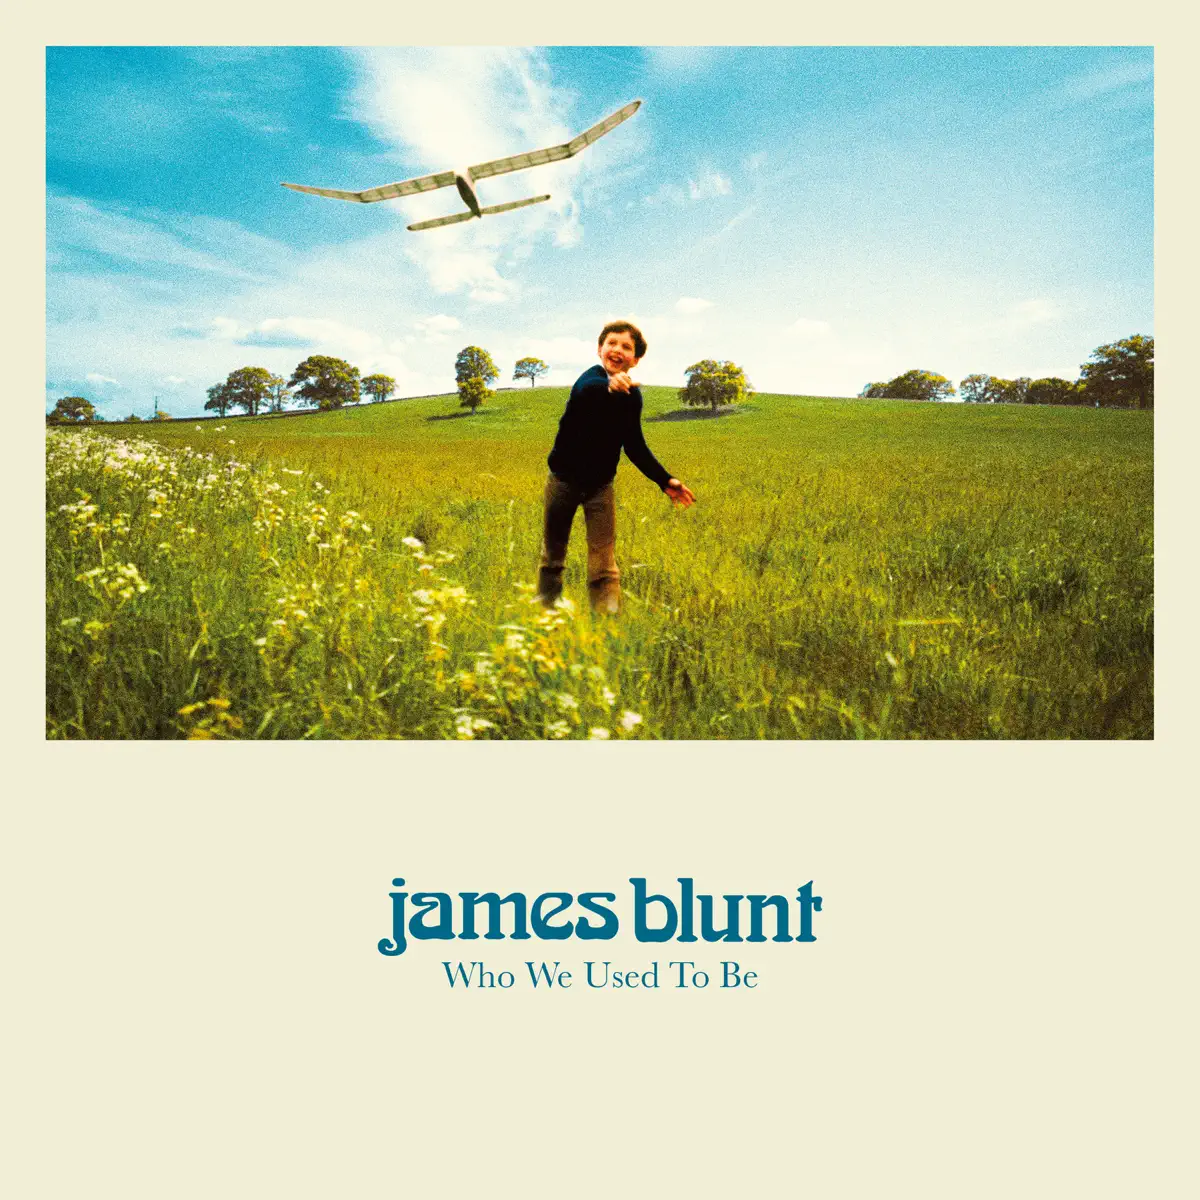 James Blunt - The Girl That Never Was - Pre-Single (2023) [iTunes Plus AAC M4A]-新房子